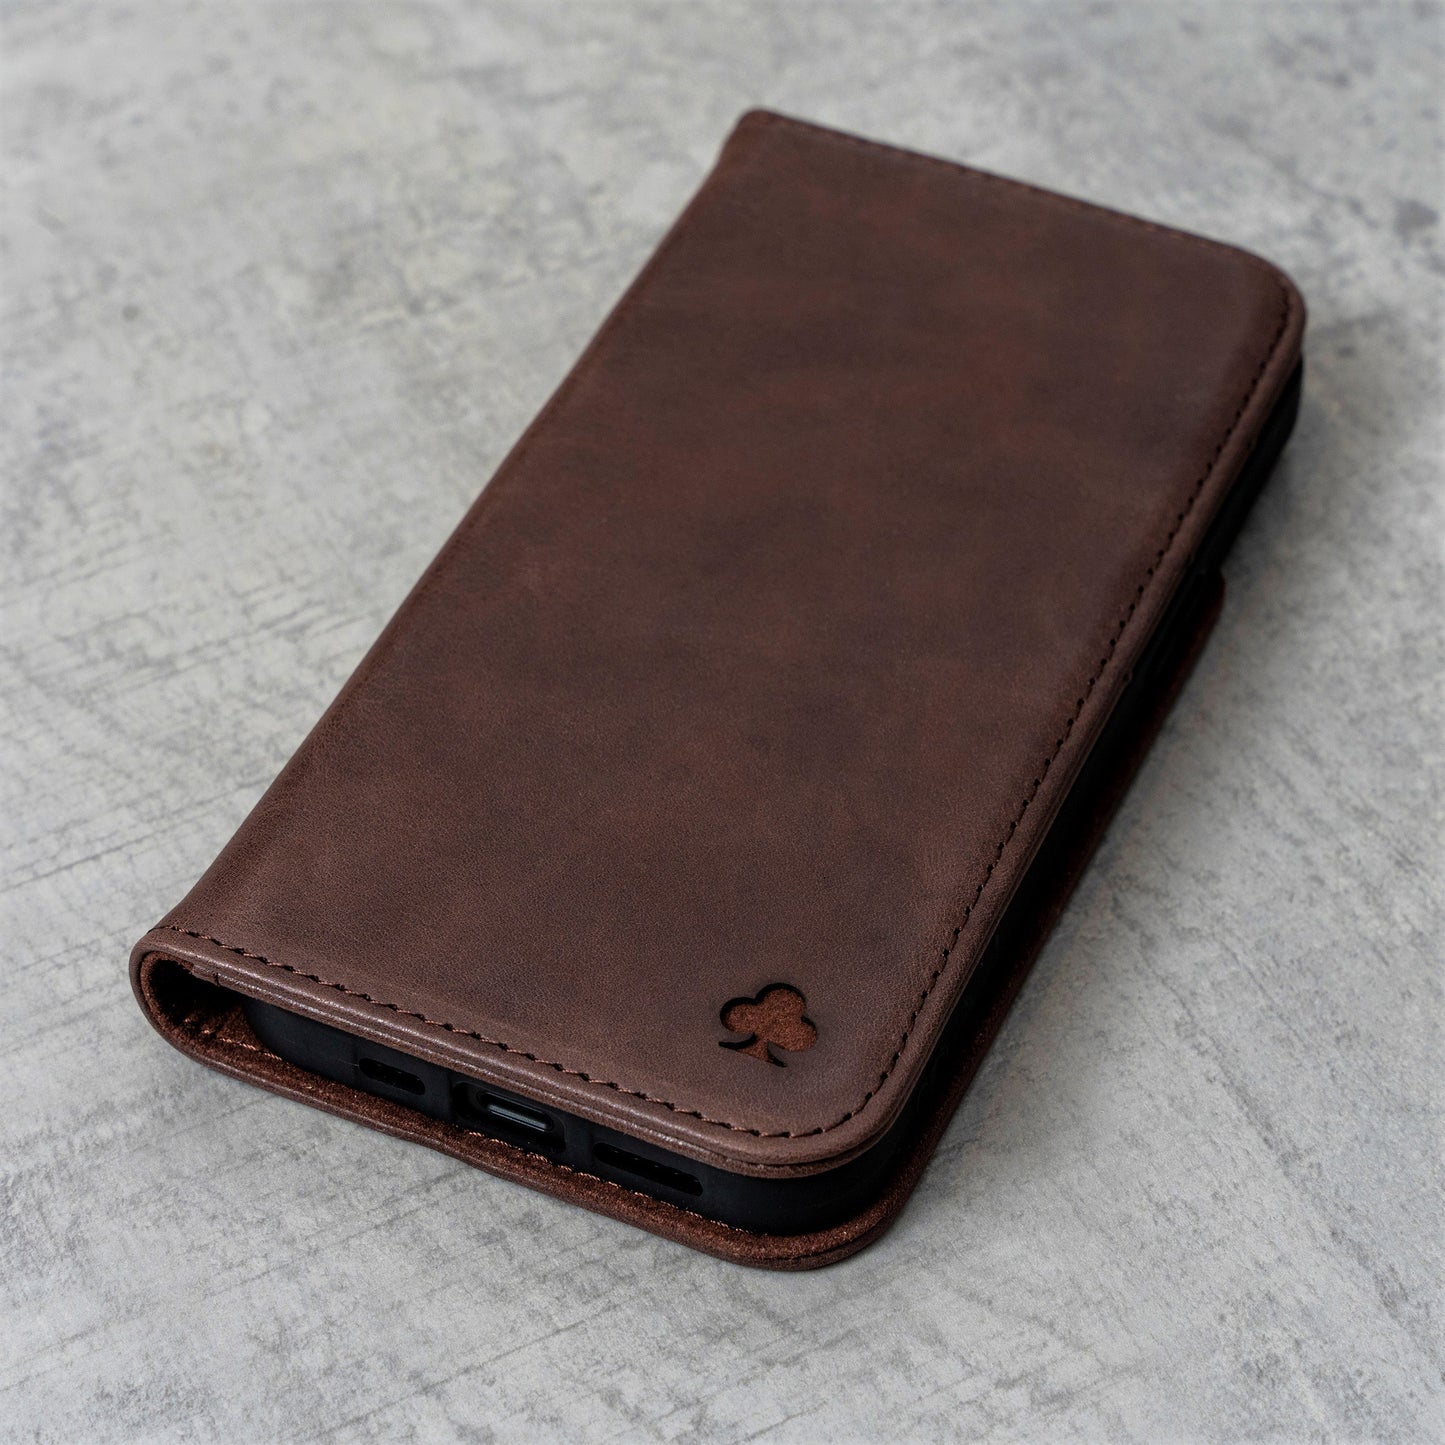 iPhone 14 Pro Max Leather Case. Premium Slim Genuine Leather Stand Case/Cover/Wallet (Chocolate Brown)